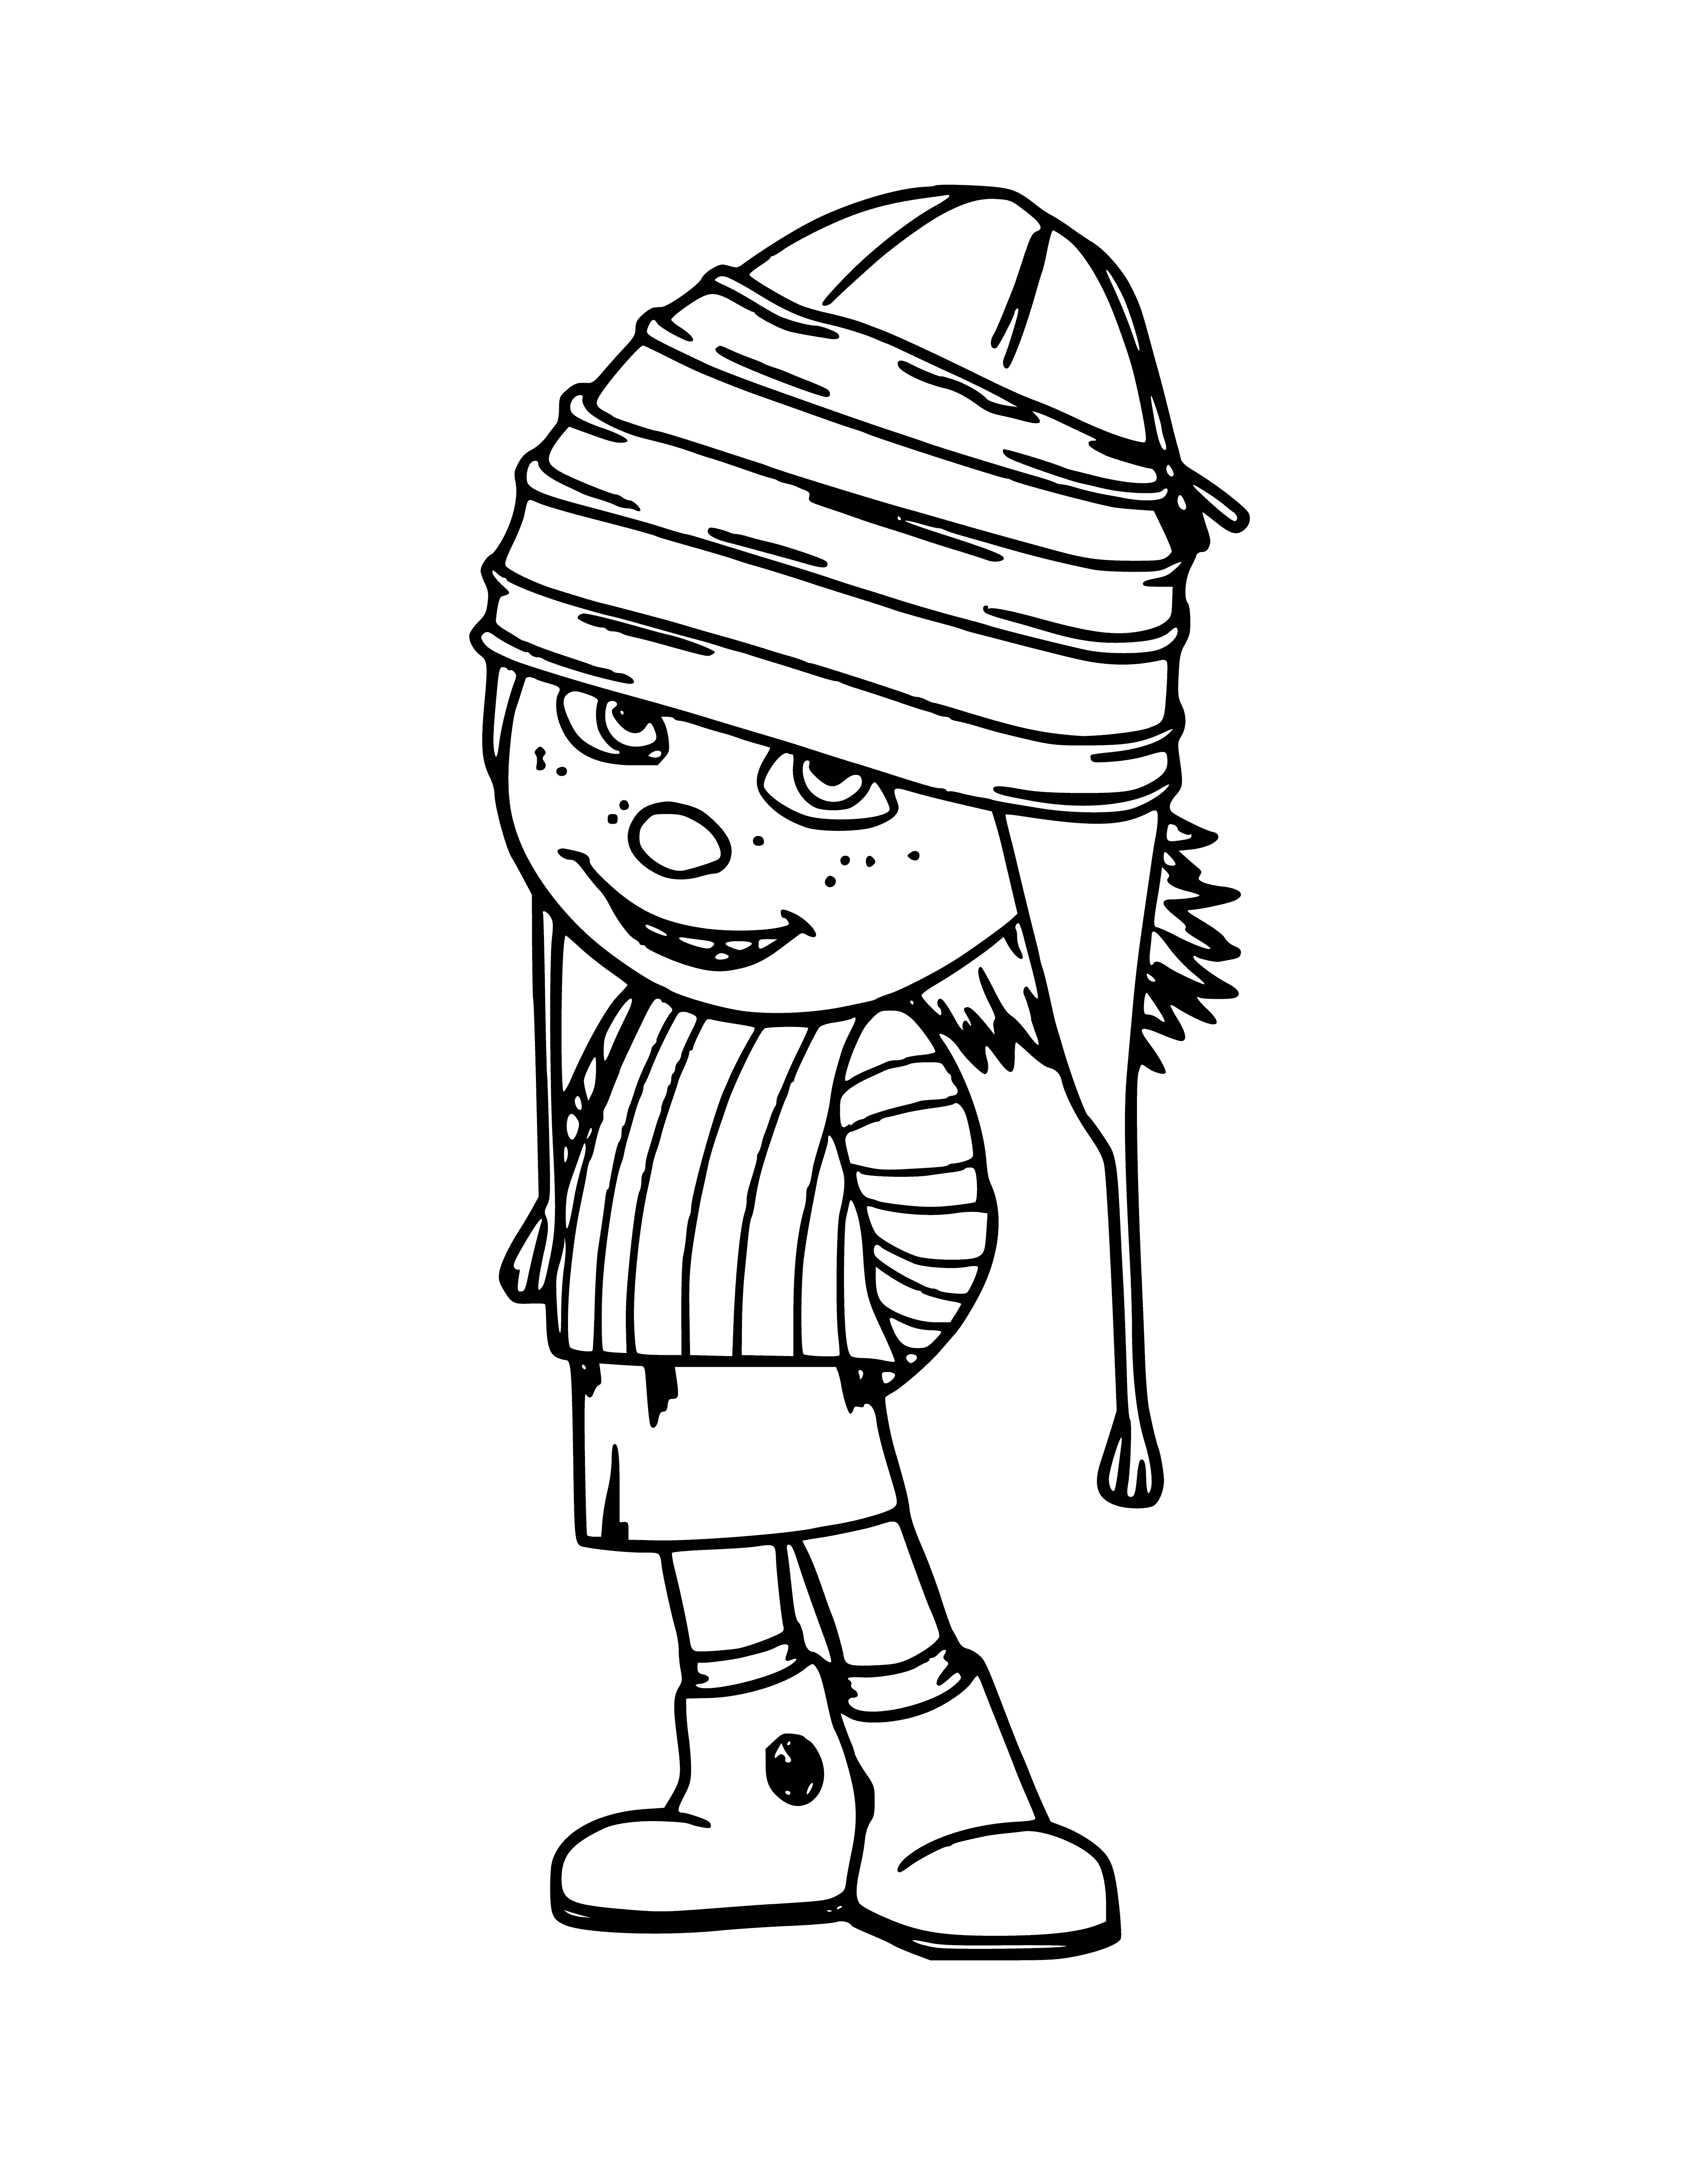 coloring page: Edith is a petite girl with big eyes, long black hair, wearing a pink & purple dress, holding a stuffed animal.